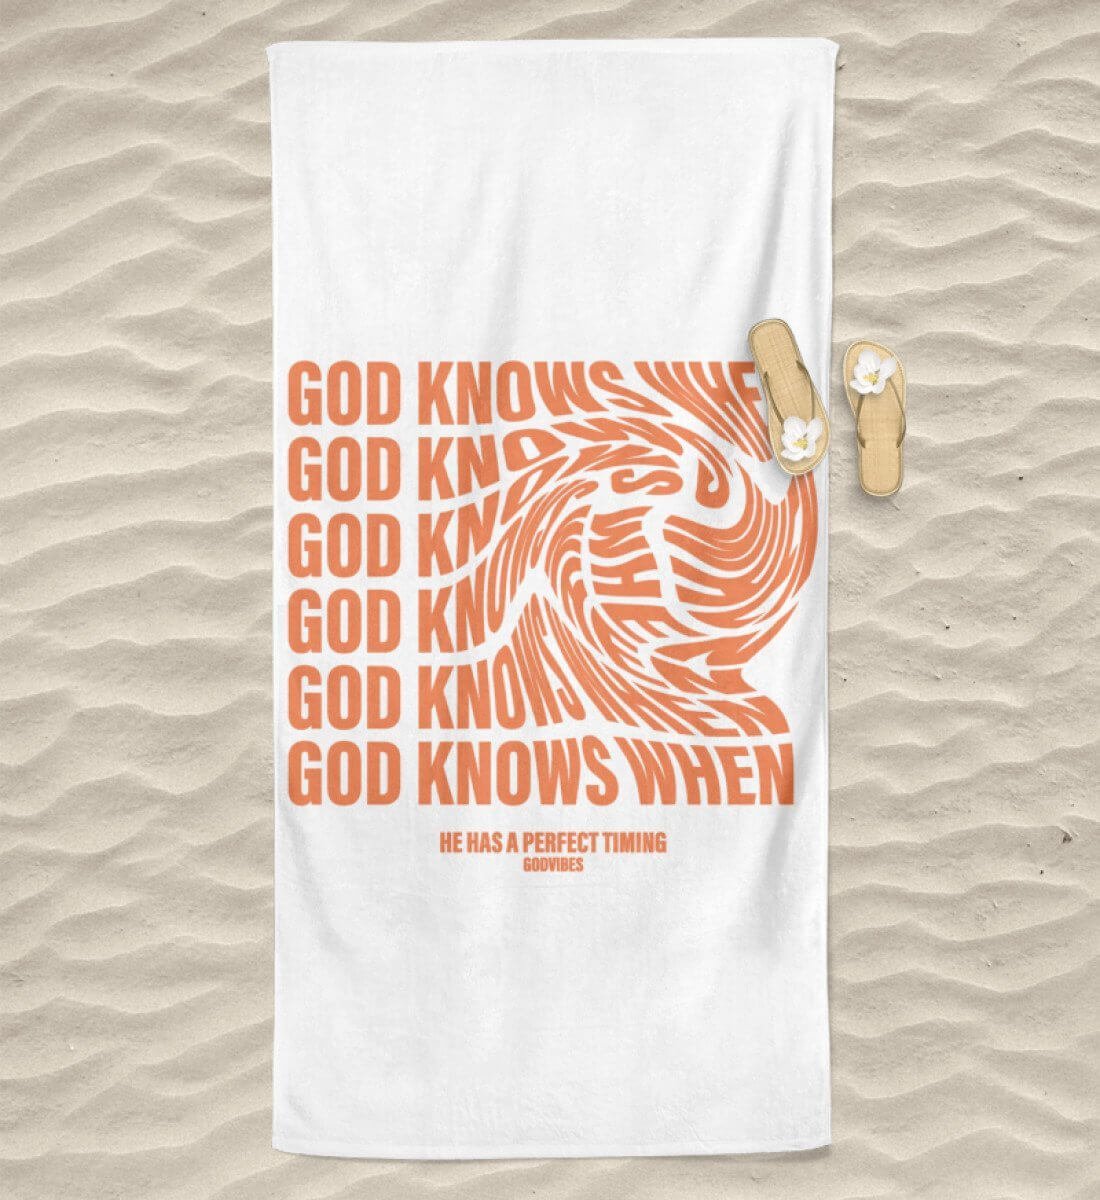 GOD KNOWS WHEN | Strandtuch - GODVIBES